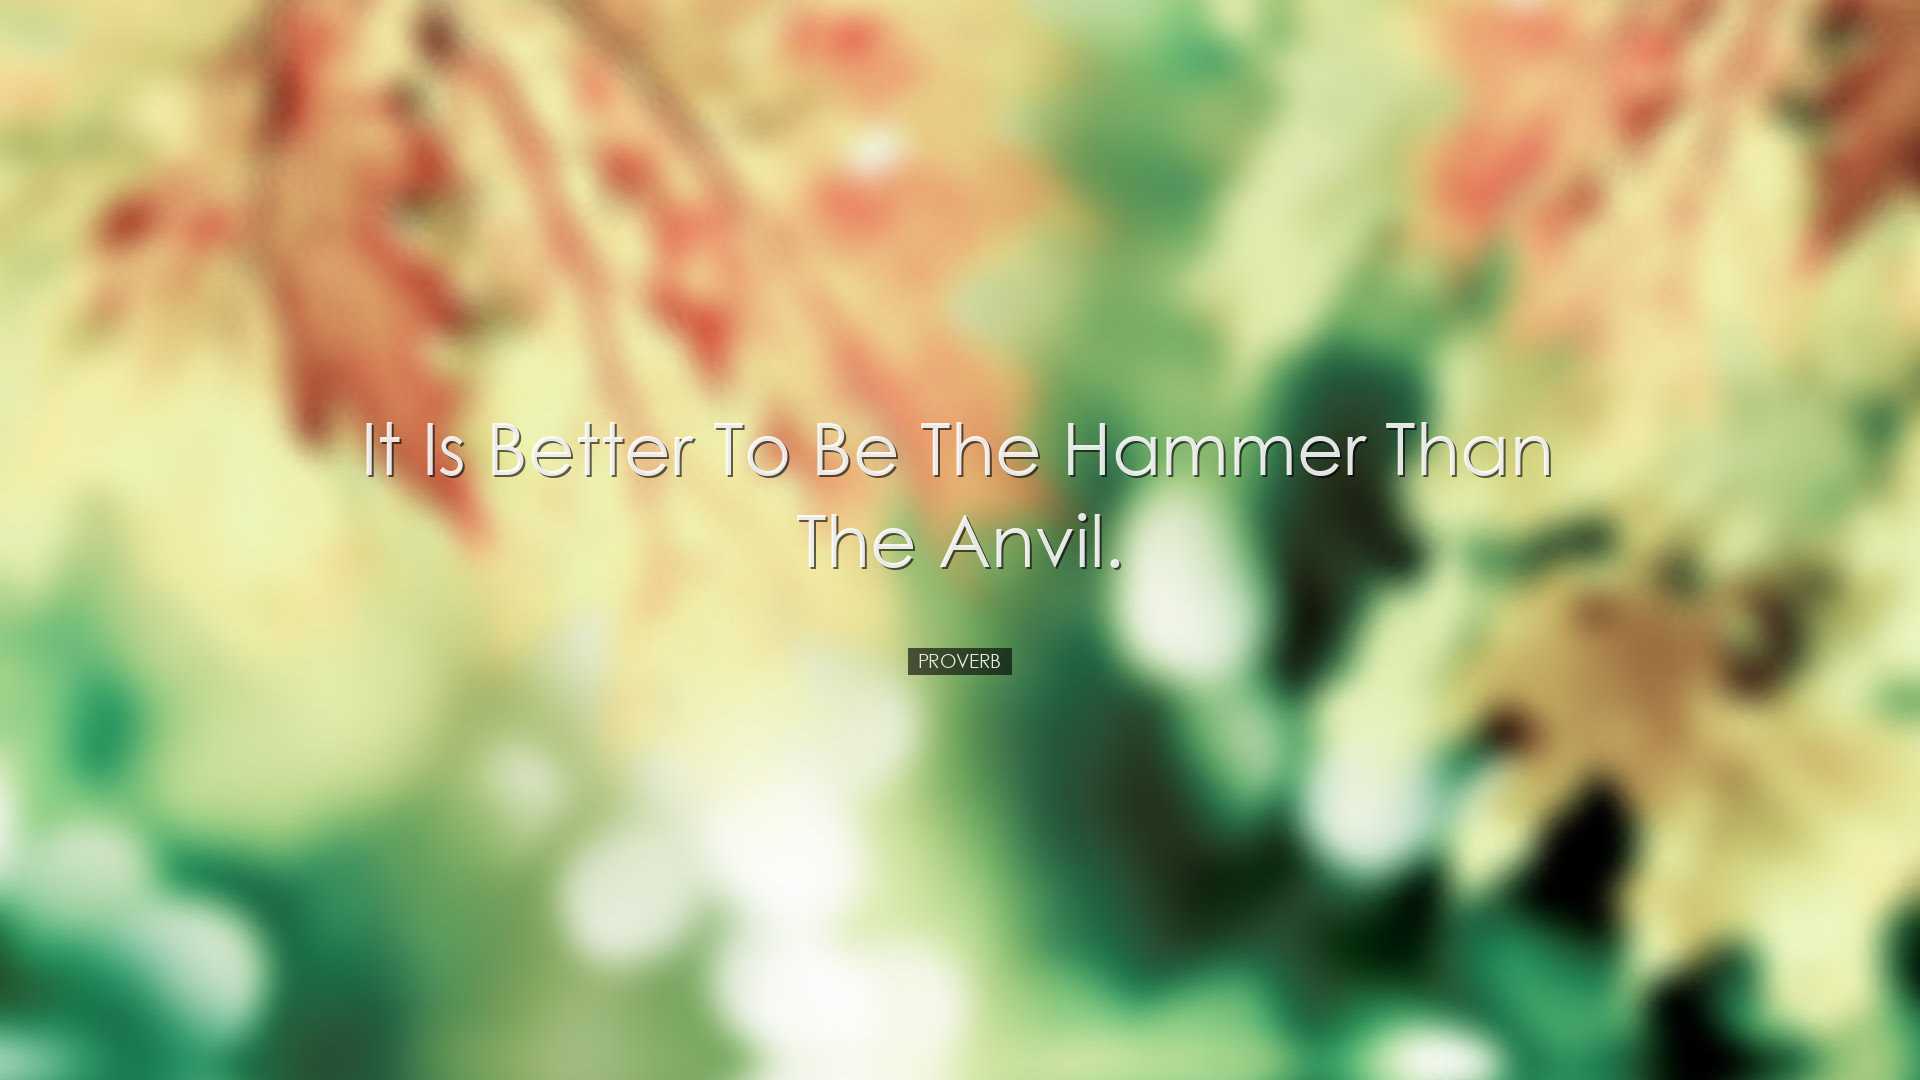 It is better to be the hammer than the anvil. - Proverb